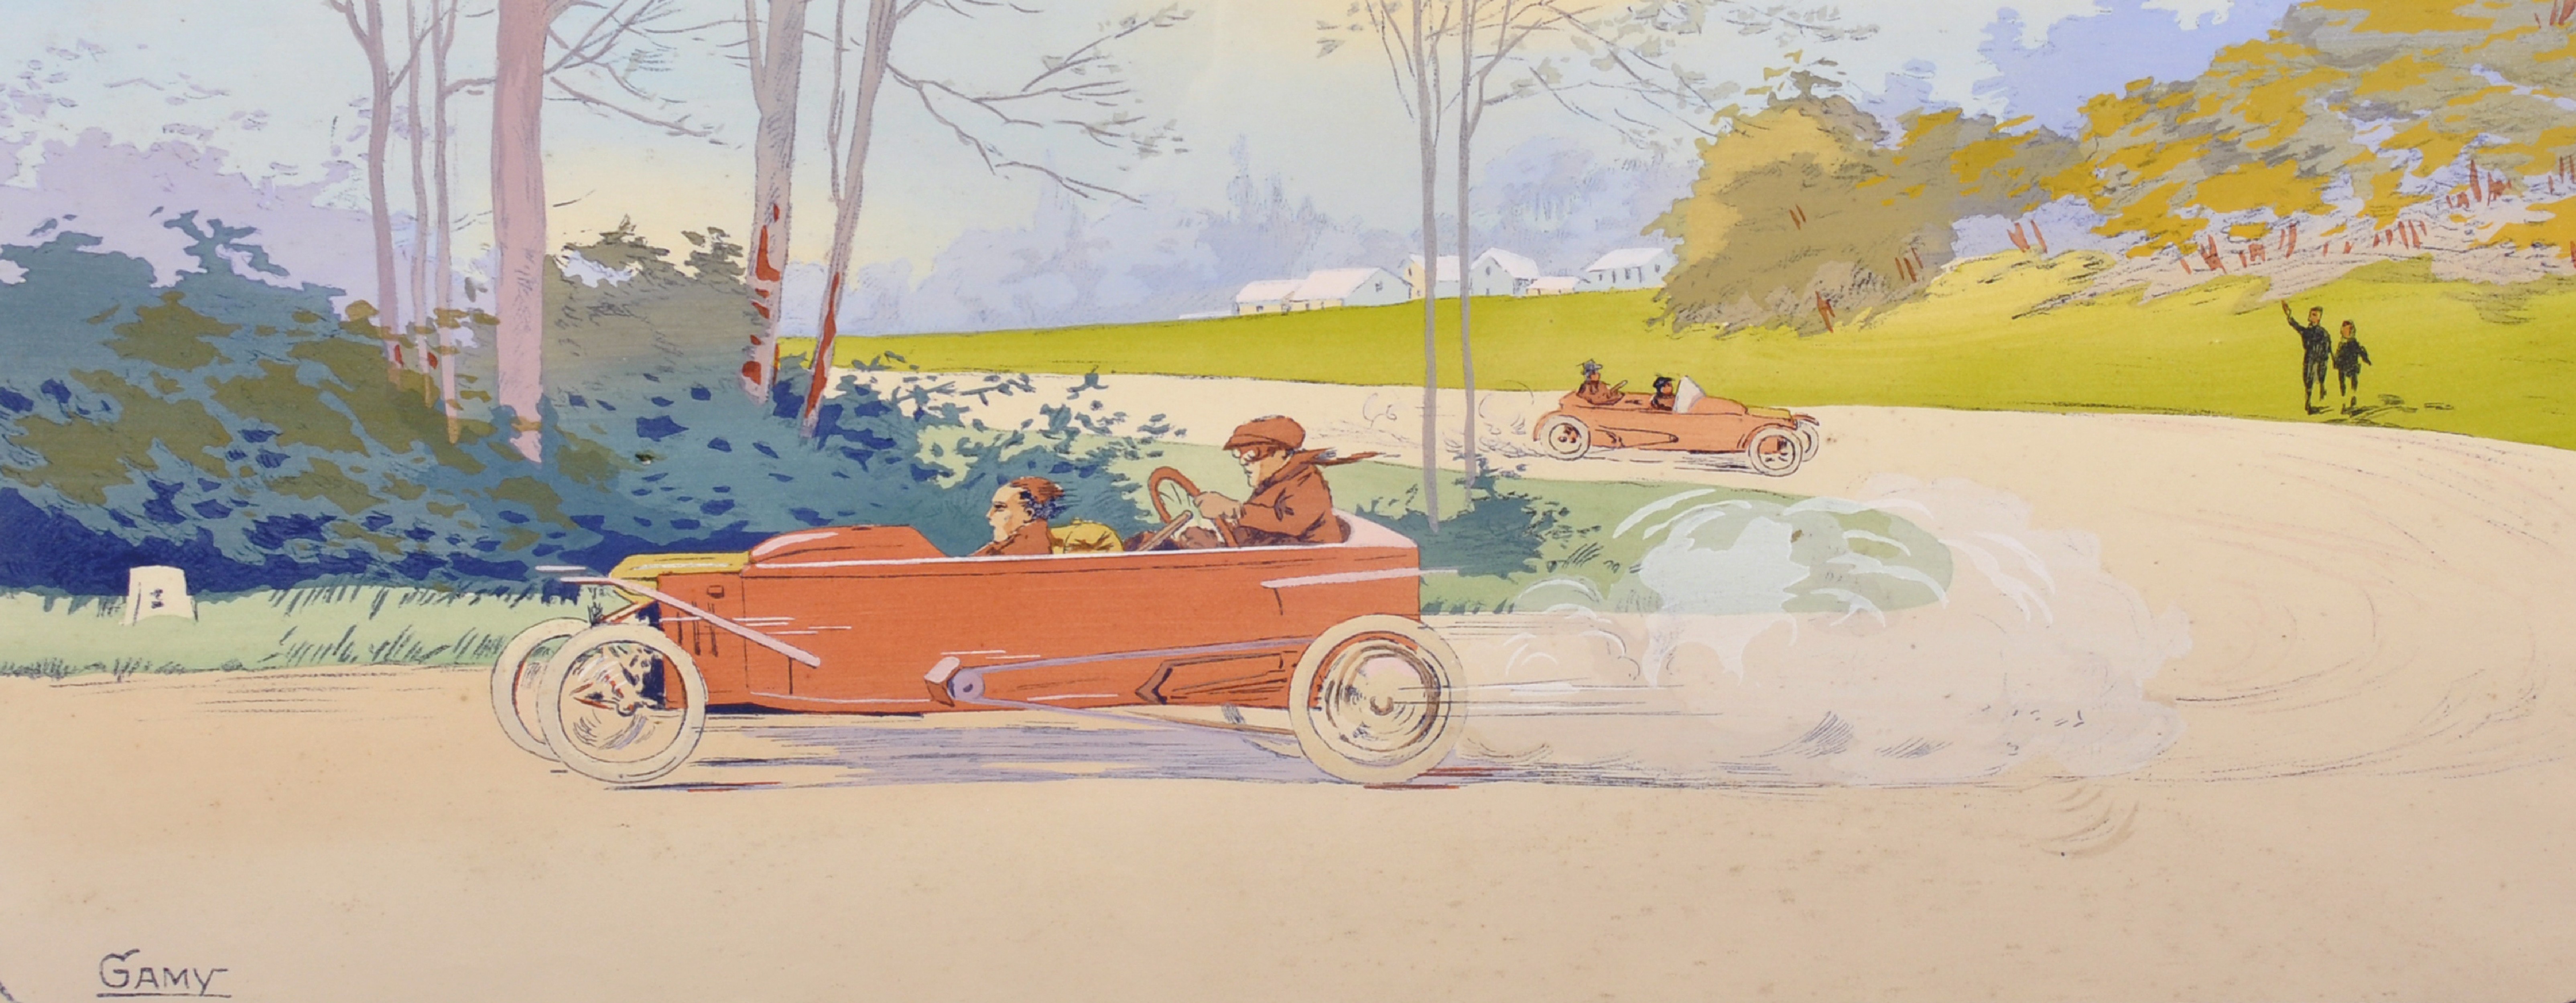 Ernest & Marguerite Gamy Montaut (19th - 20th Century) French. 'Racing Cars', Pochoir Print and